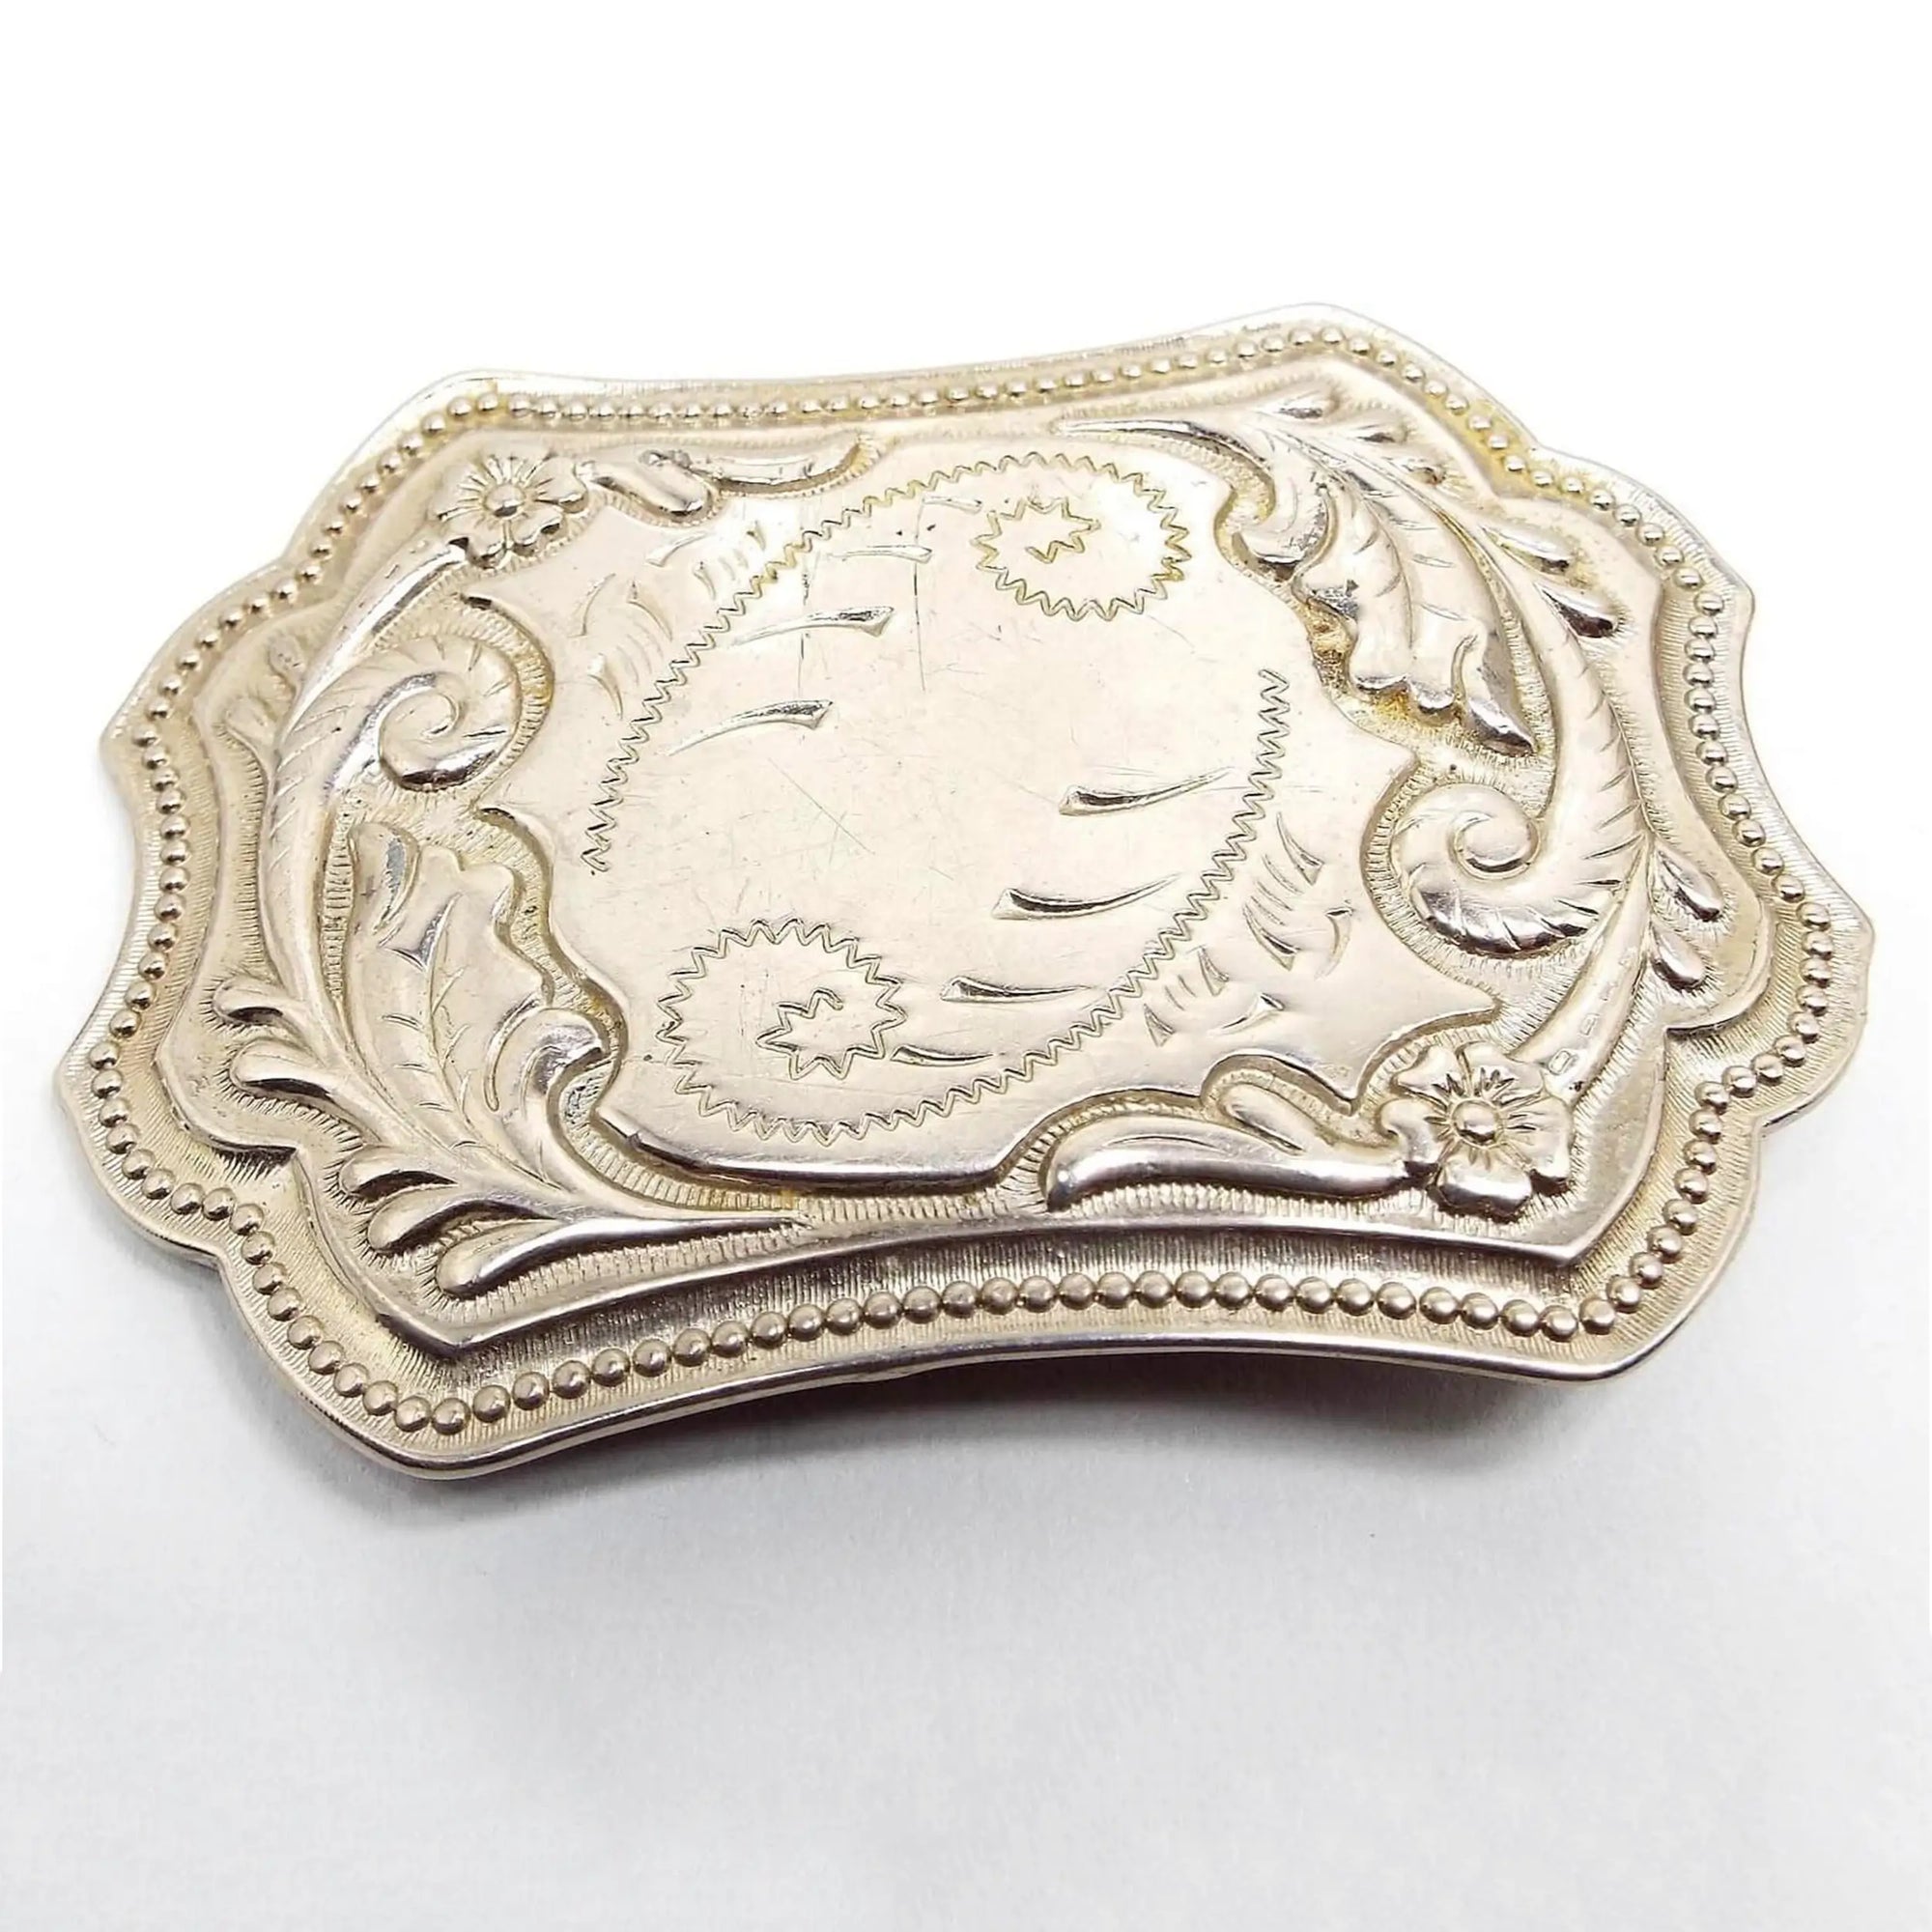 Front view of the retro vintage silver tone belt buckle. It has an etched and raised curled leaf like design and a dotted pattern around the edge. There is a flower on two of the corners. A few small scuff scratches from age can be seen on the front.